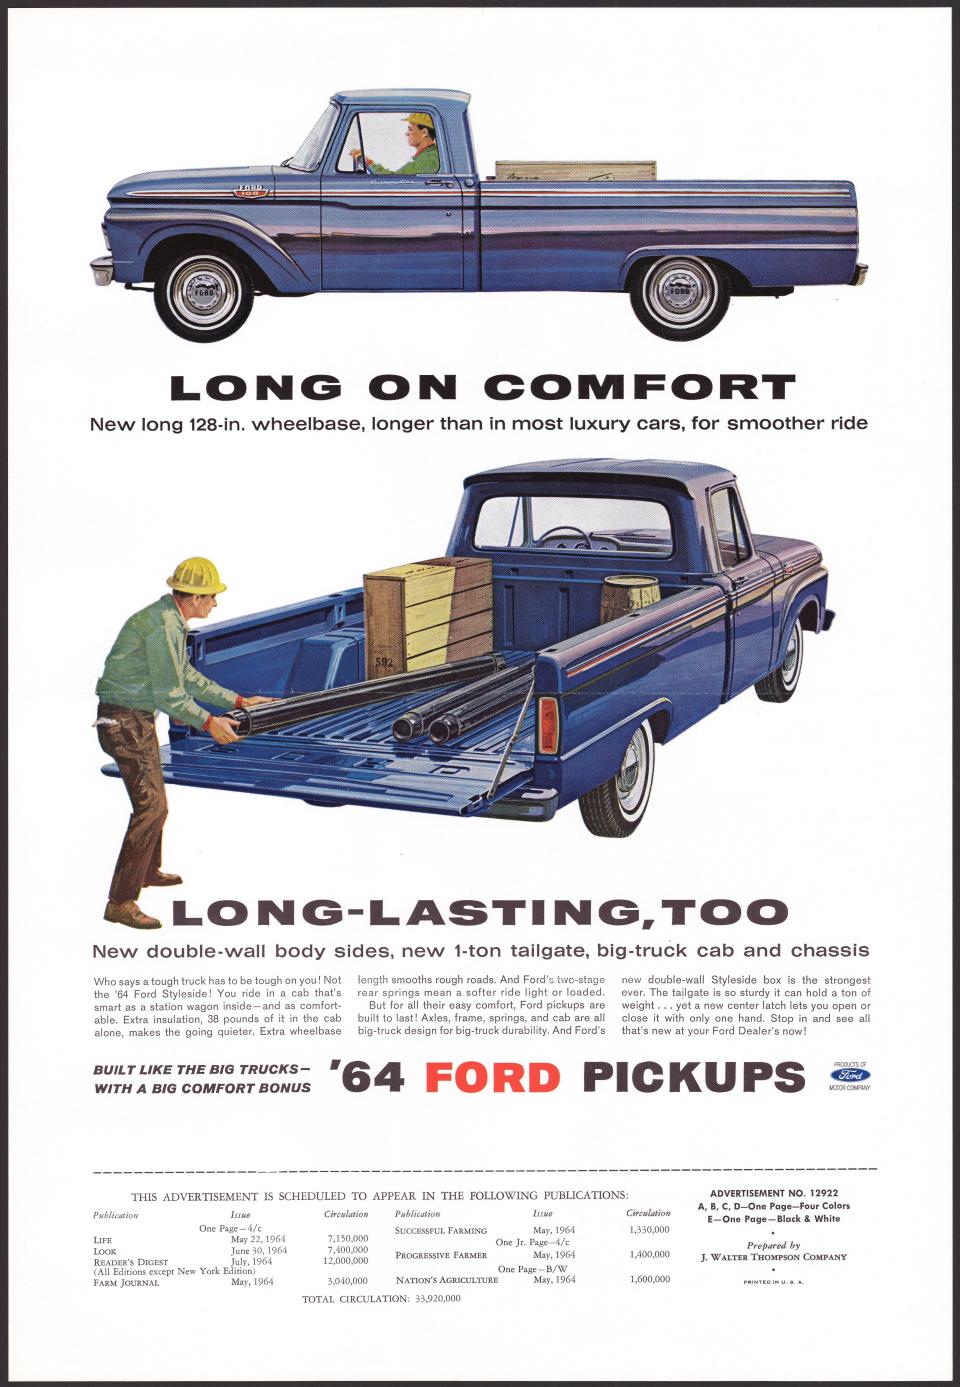 1964 Ford pickup truck advertisement.